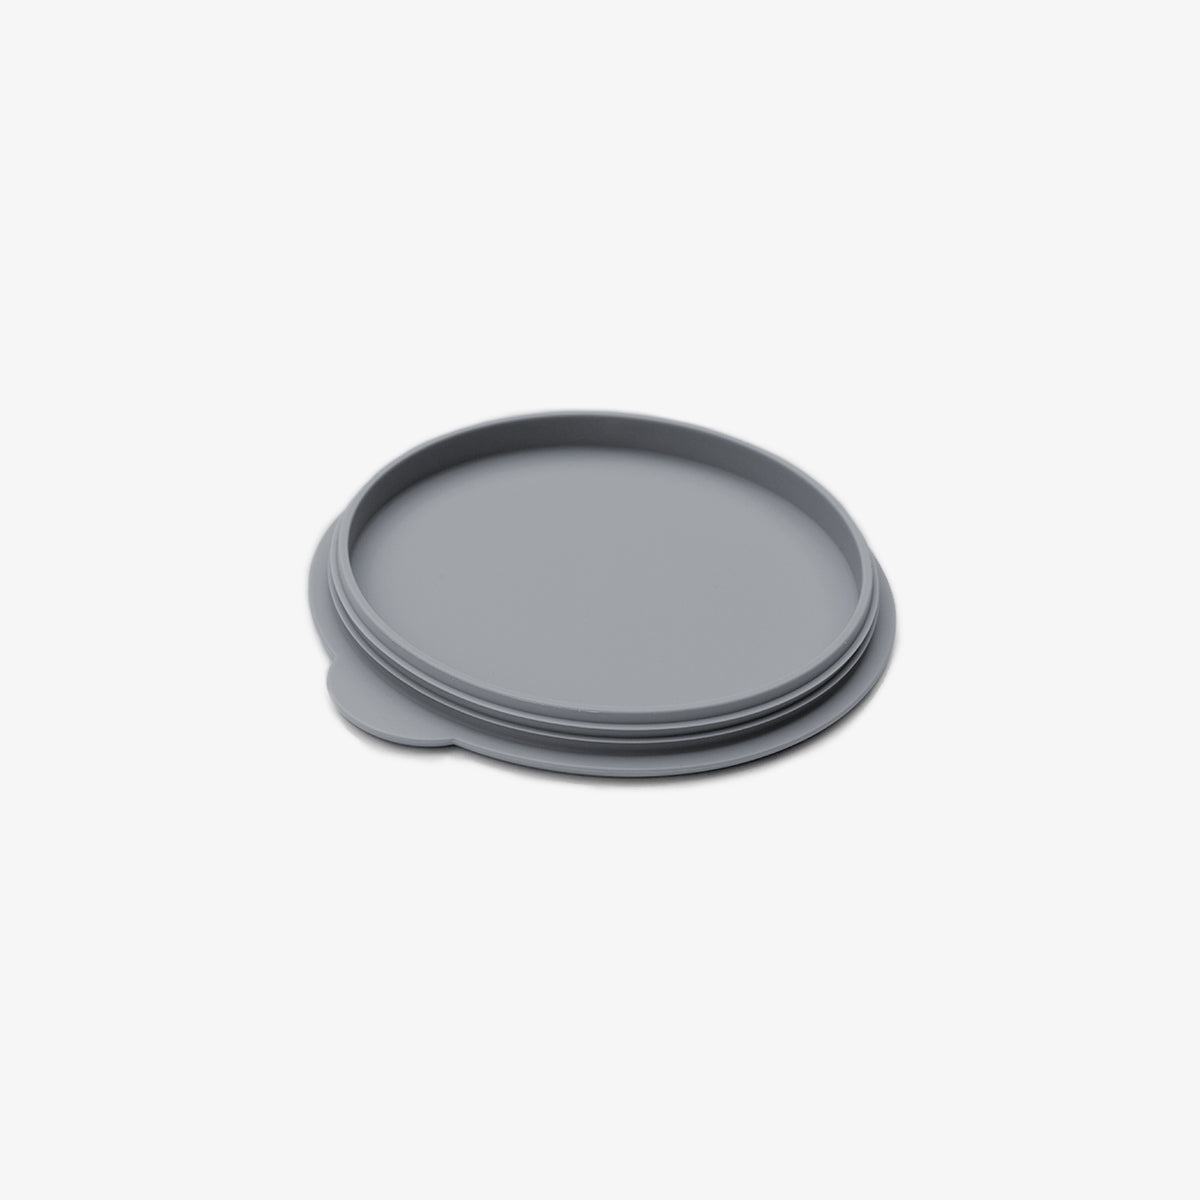 Mini Bowl Lid in Gray by ezpz / The Original All-In-One Silicone Plates & Placemats that Stick to the Table